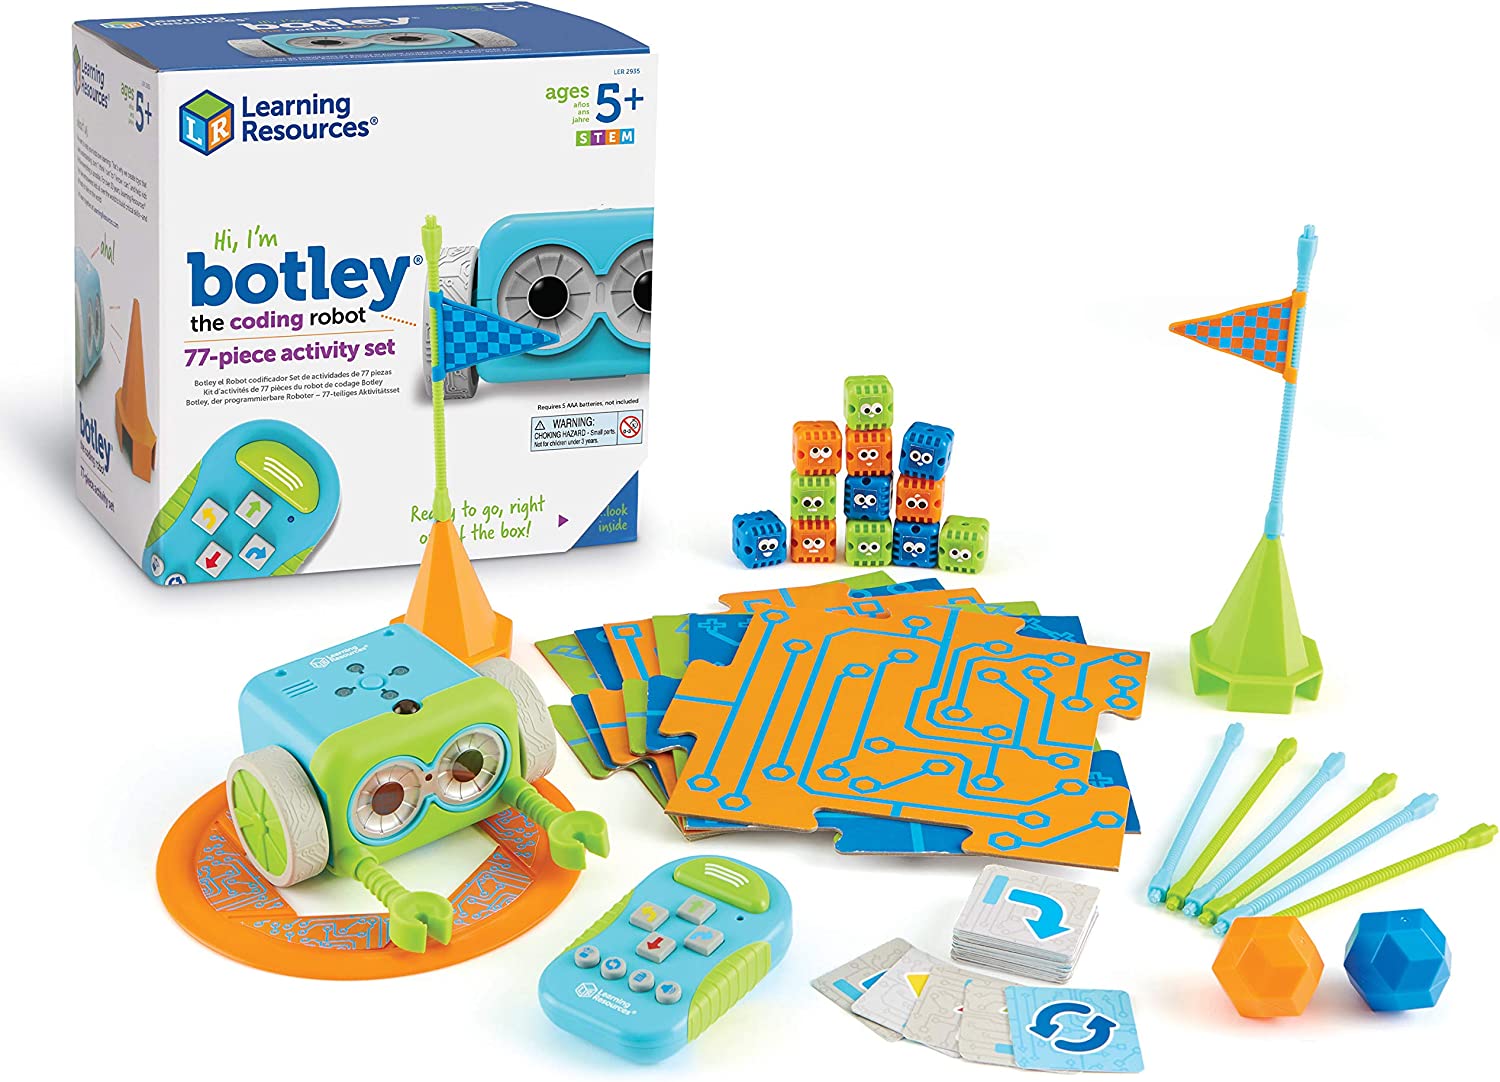 Botley 2.0 Review - Techniques to use it. - Techclass4kids